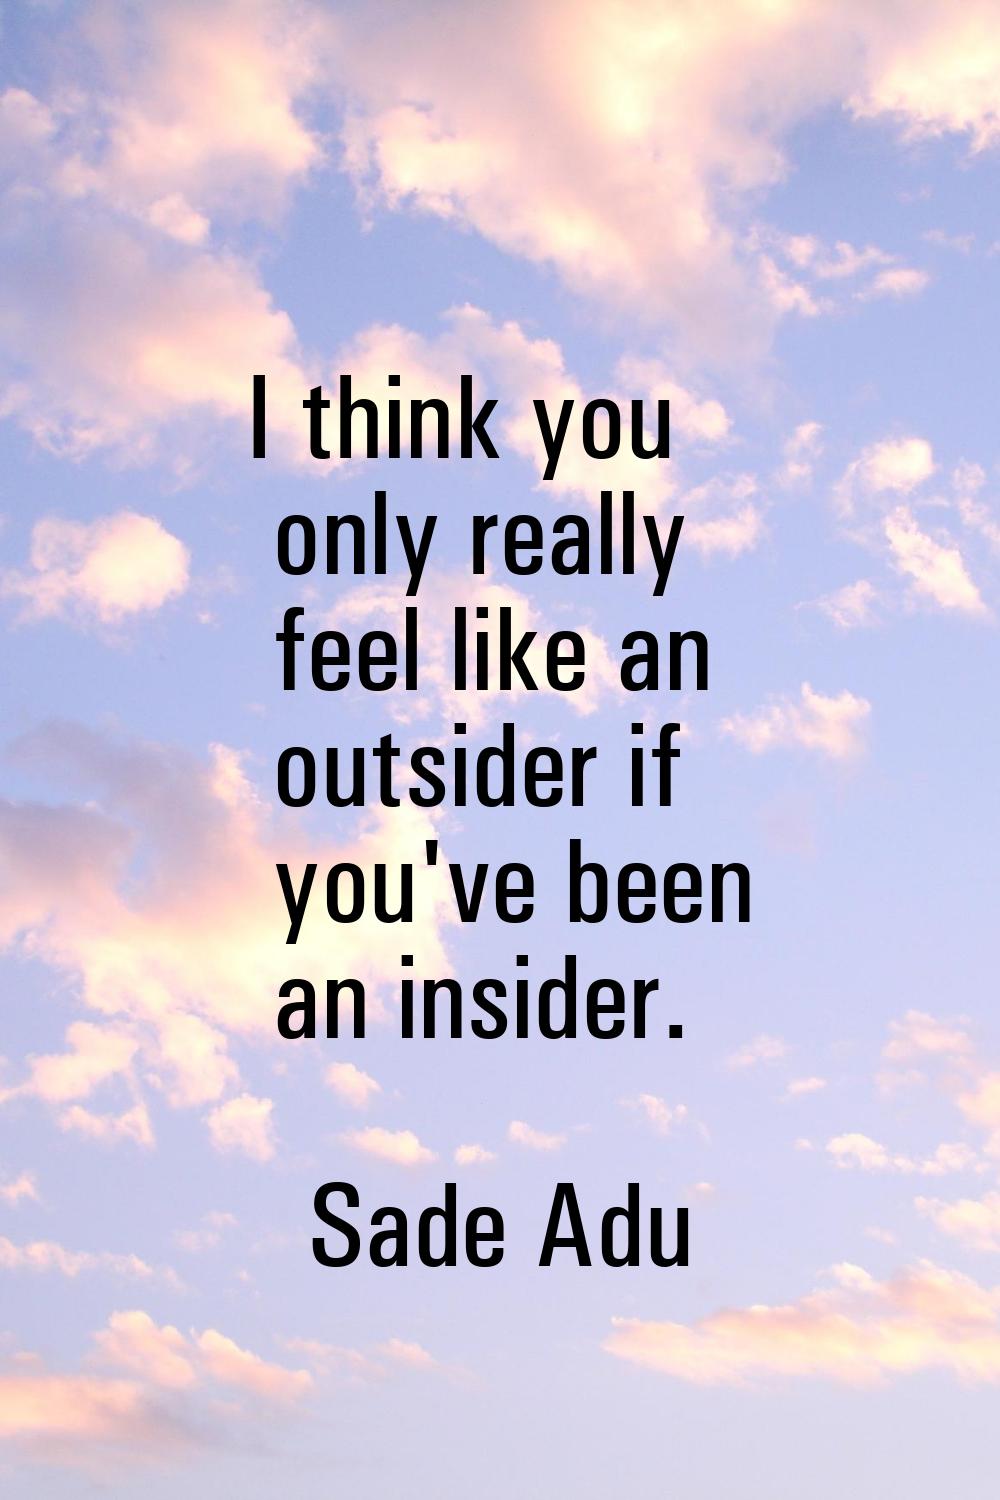 I think you only really feel like an outsider if you've been an insider.